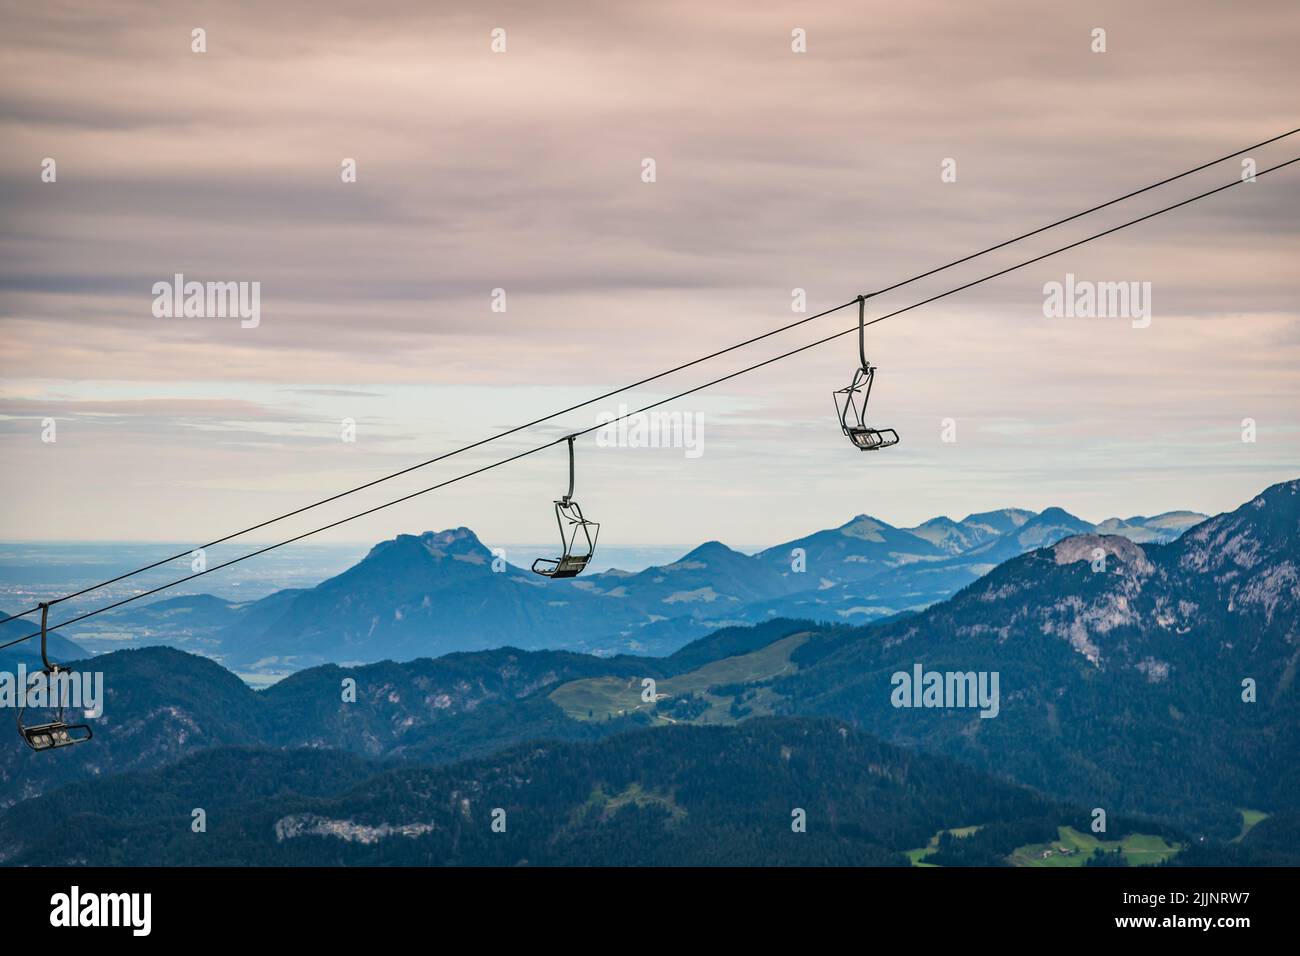 An aerial lift near the peaks of the hills above the gorge Stock Photo